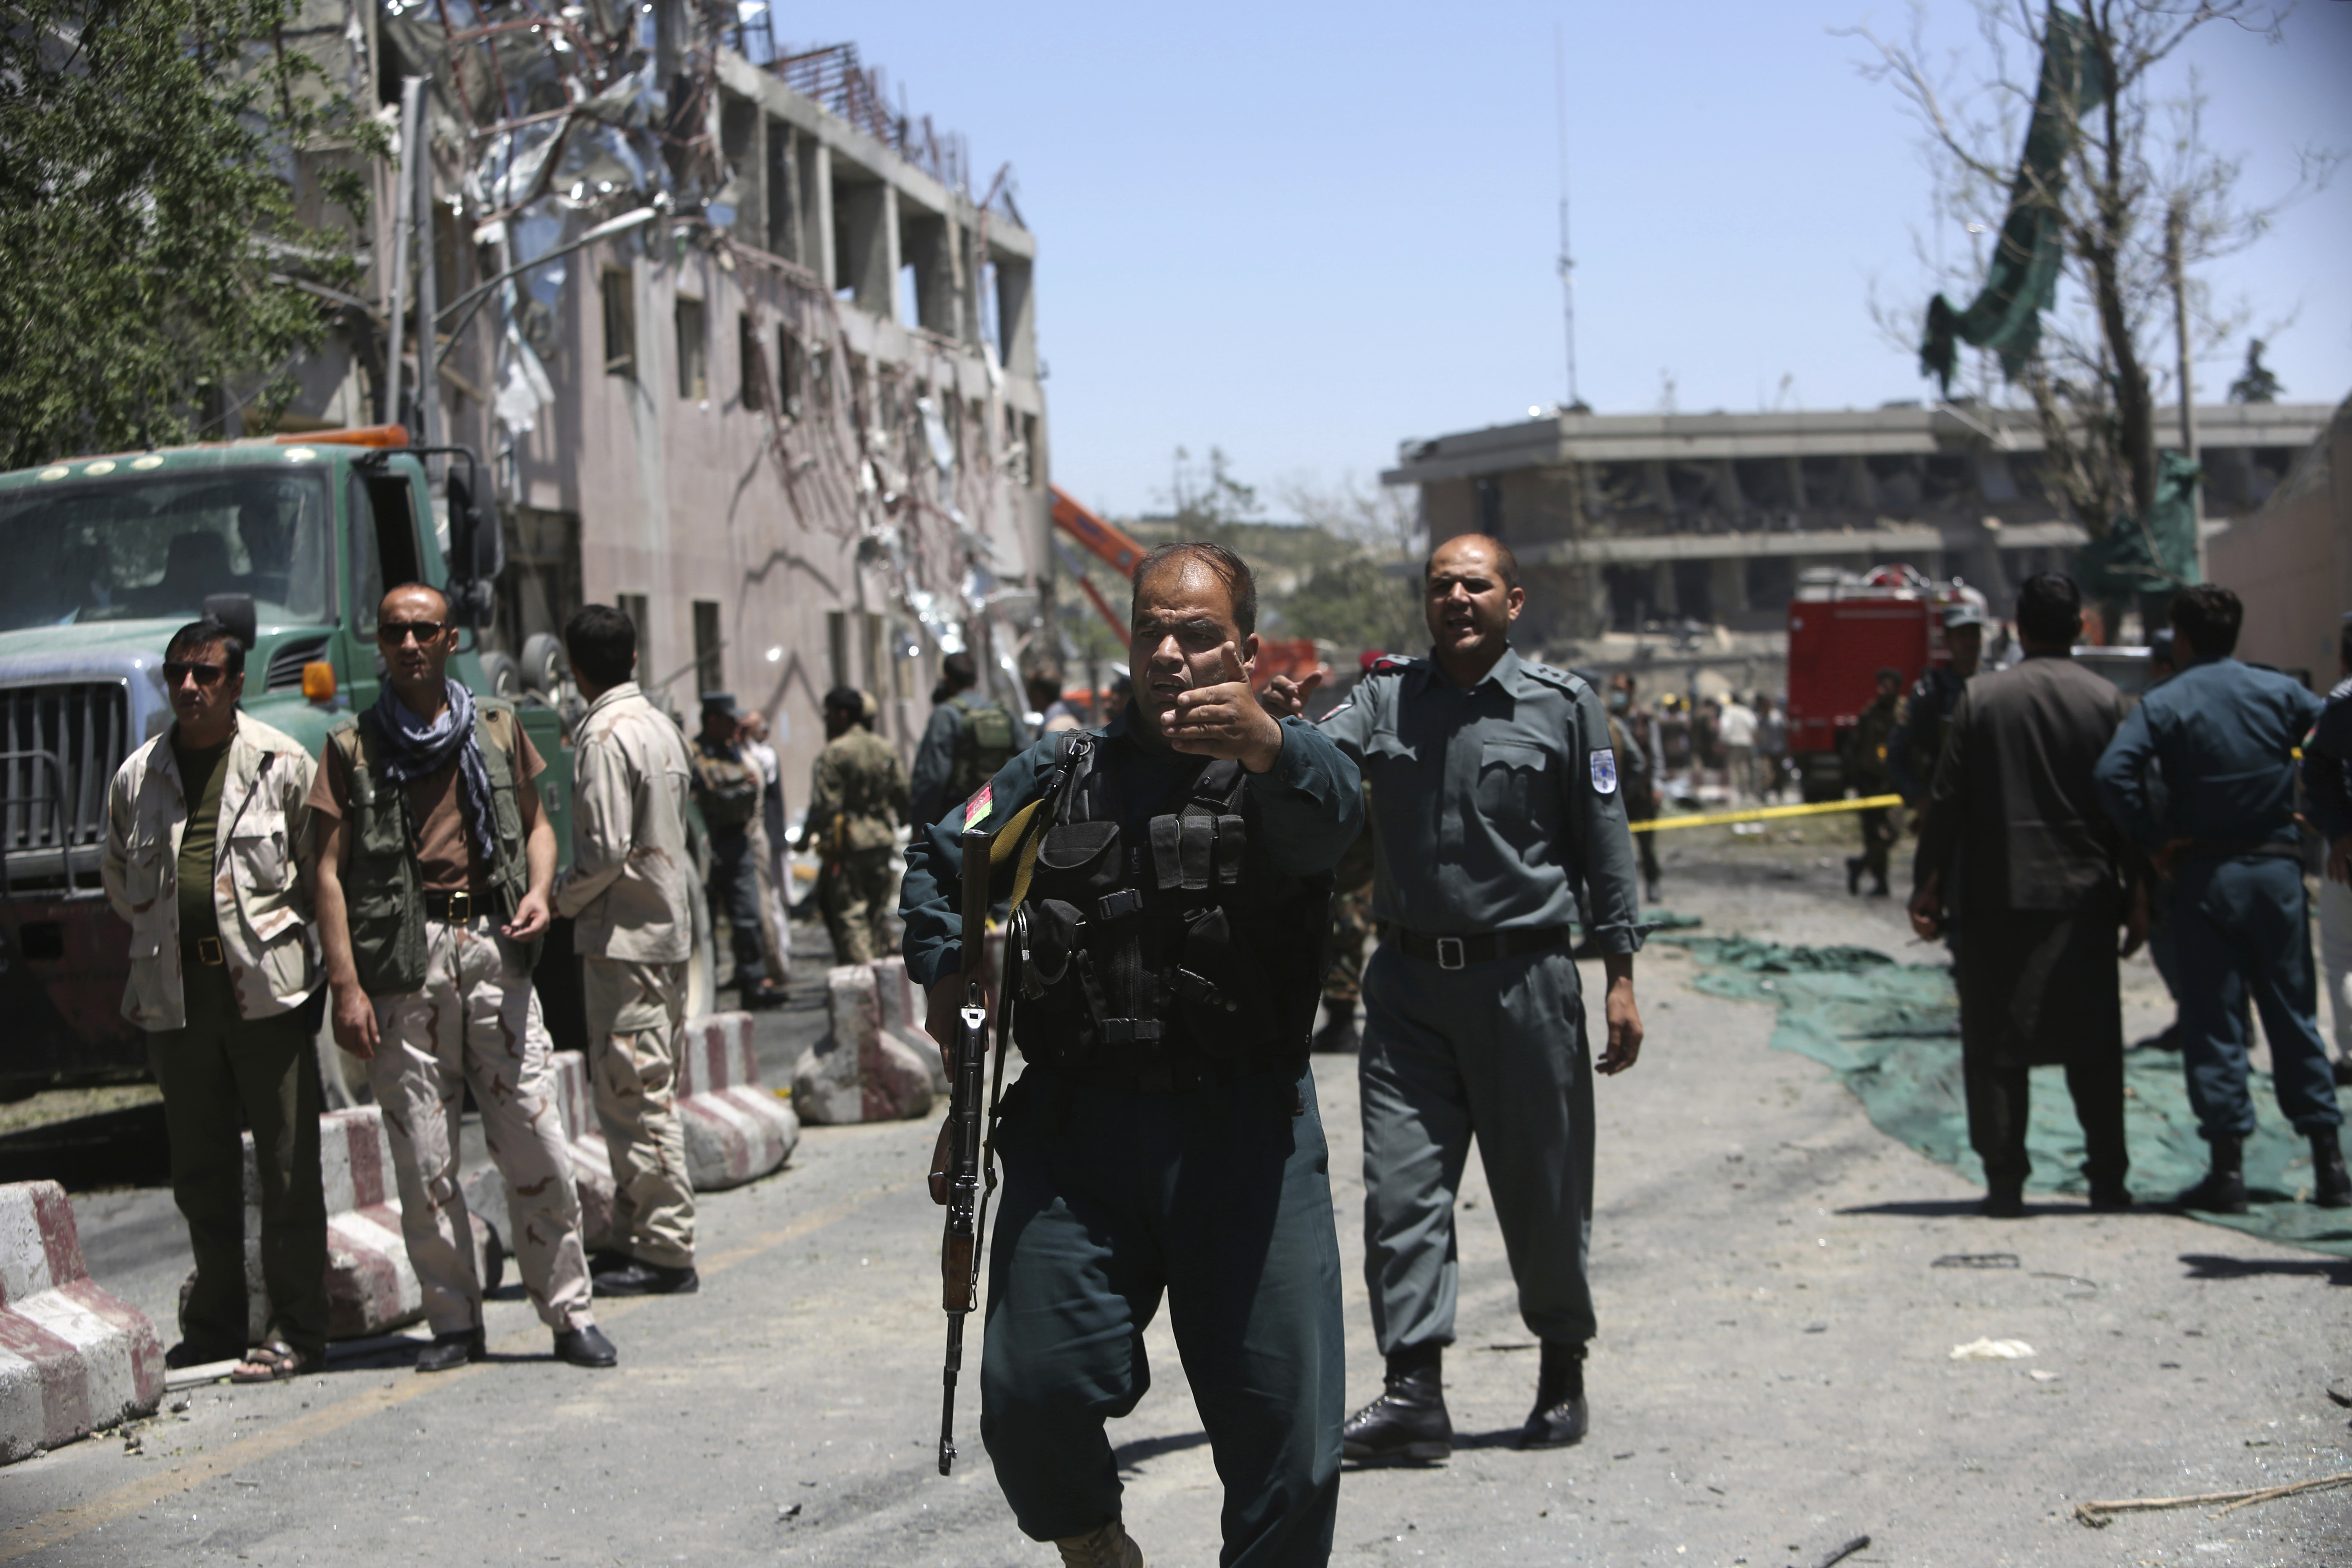 Security forces inspect near the site of a suicide attack in Kabul, Afghanistan, May 31, 2017. A massive explosion rocked a highly secure diplomatic area of Kabul on Wednesday morning, causing casualties and sending a huge plume of smoke over the Afghan capital. (AP/Rahmat Gul)